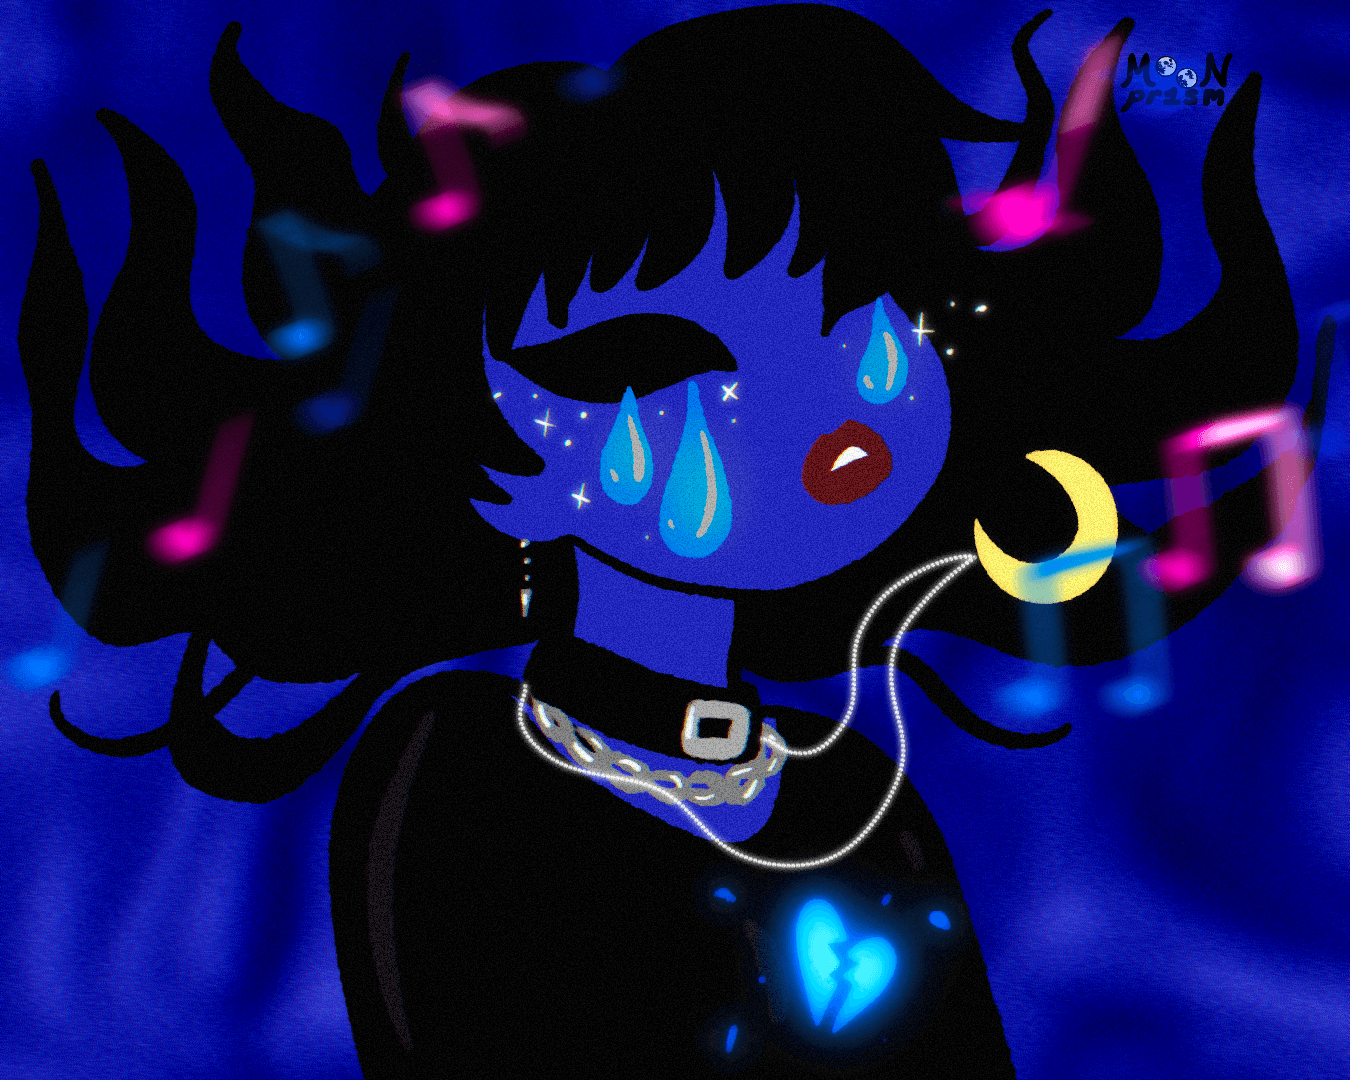 An illustration of a girl crying large blue tears surrounded by pink and blue musical notes on a dark blue background. Something is messing with the gravity and pulling up her hair and jewelry, prominently the yellow crescent moon necklace.